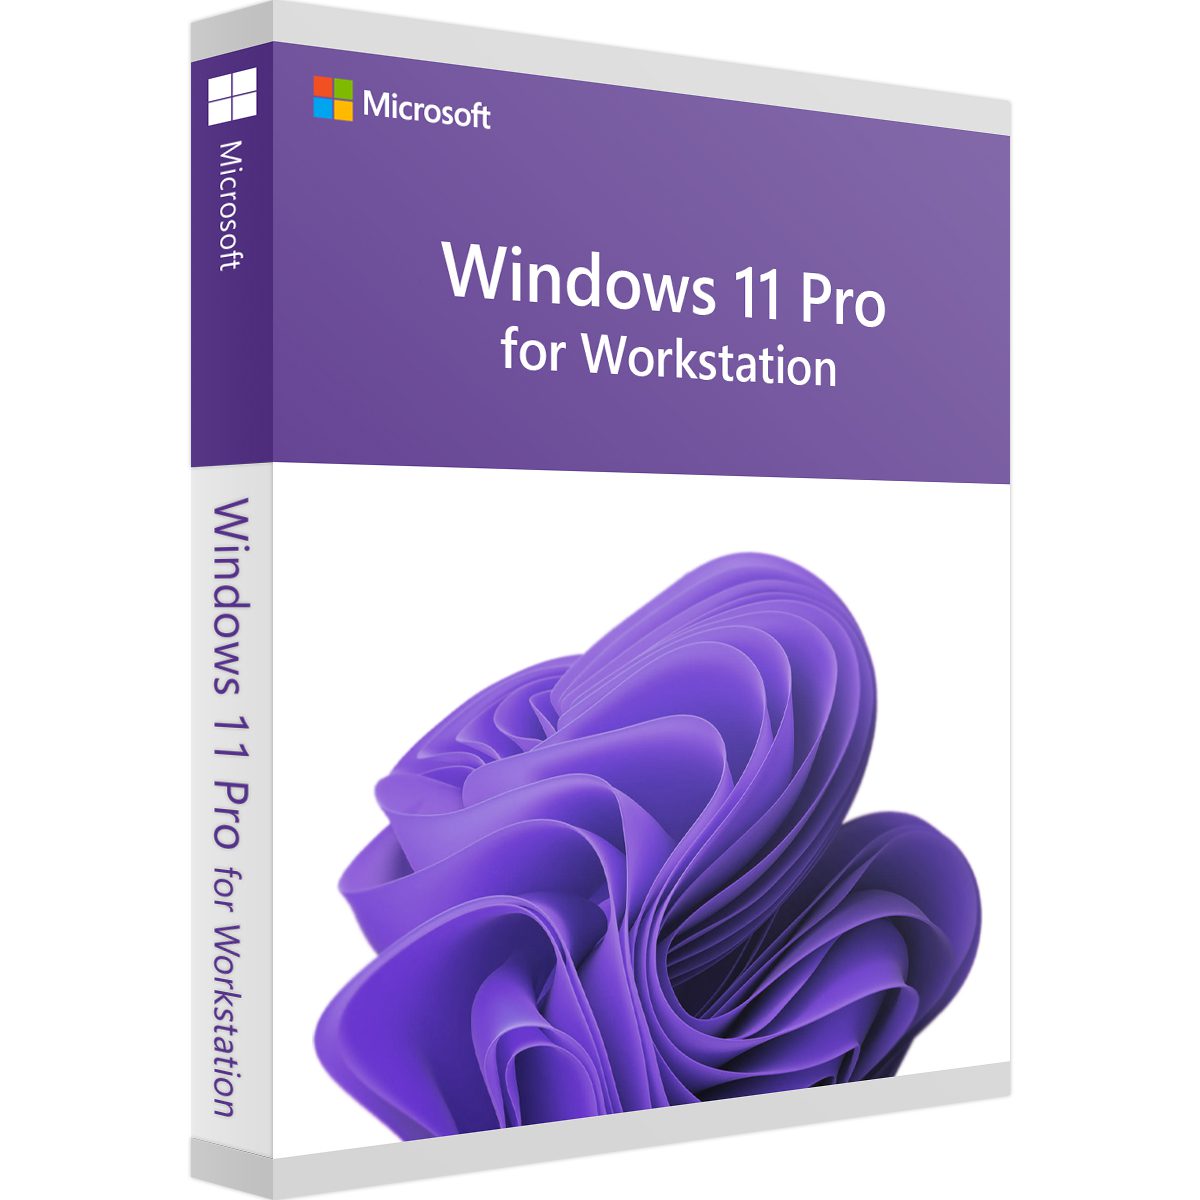 Licencia Windows 11 Pro for Workstations